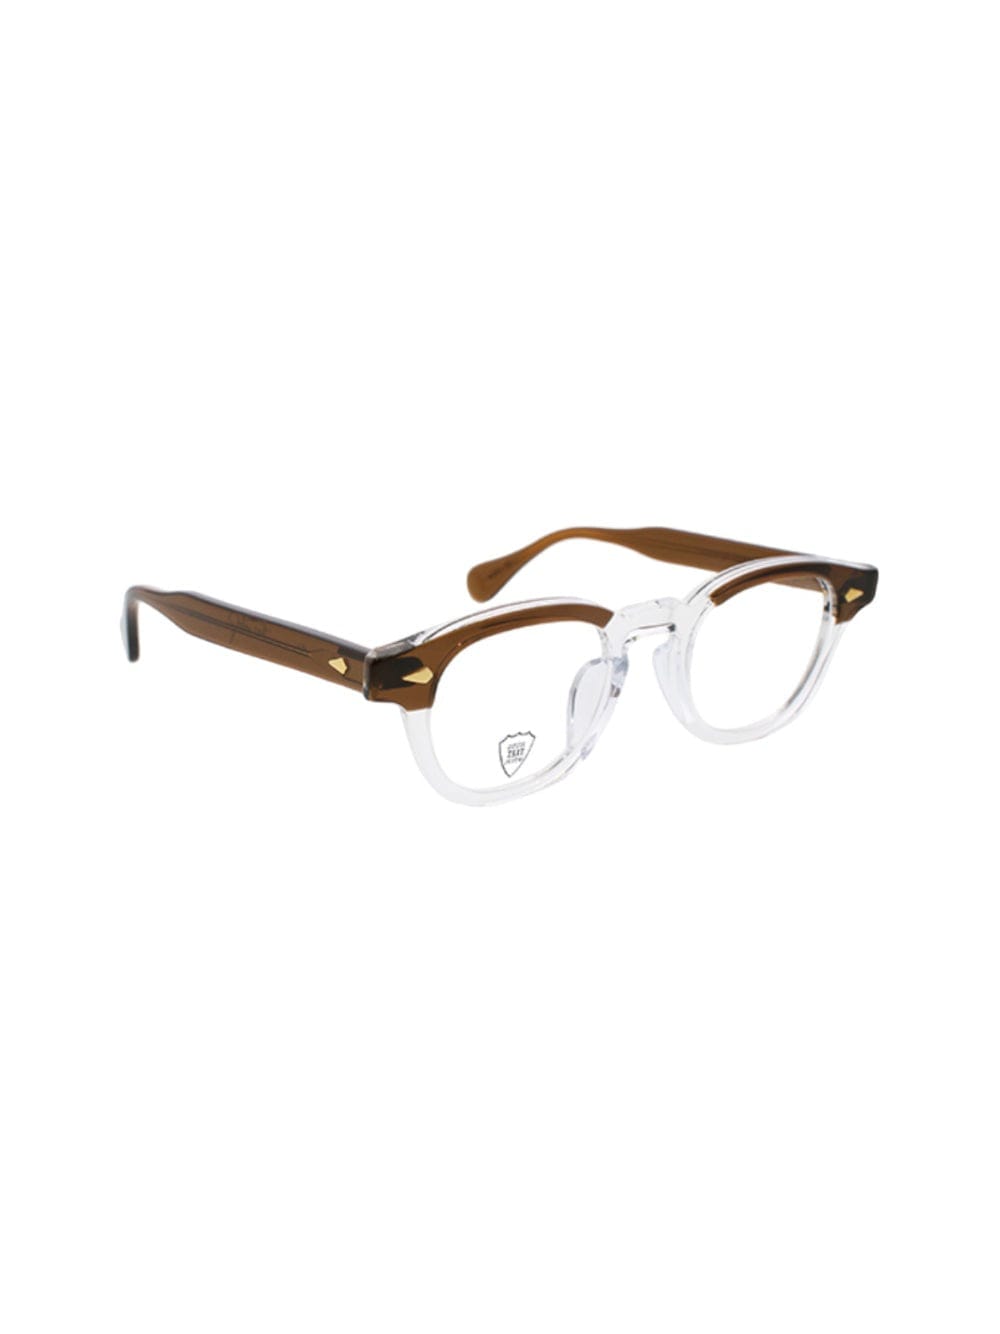 Julius Tart Optical Ar Gold - Limited Edition Glasses In Brown